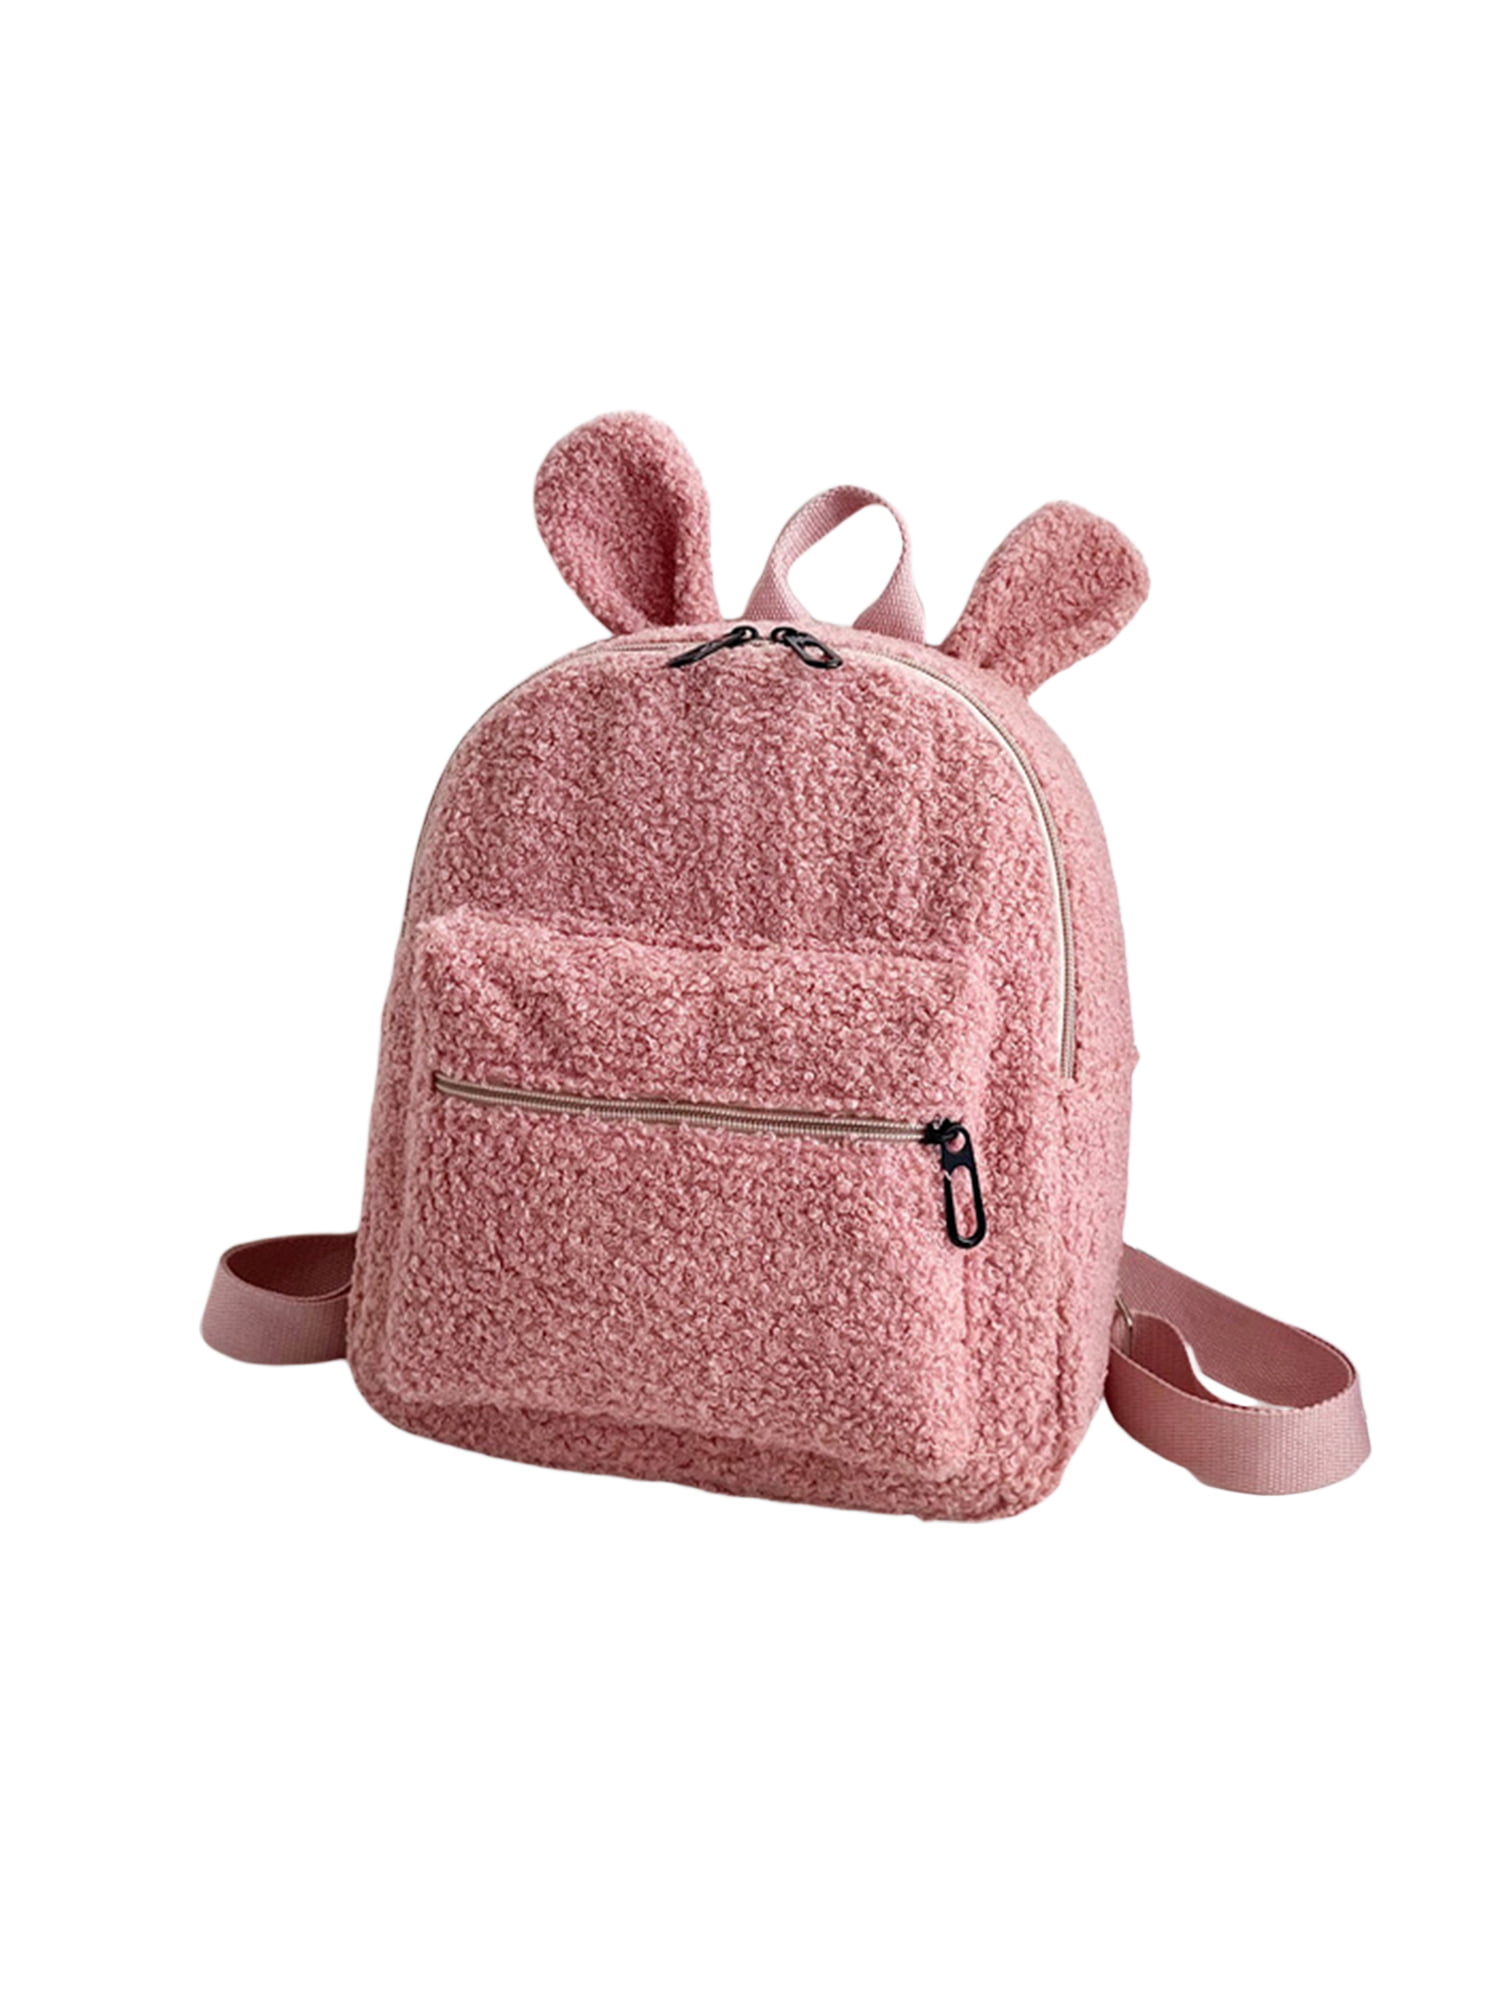 Lilico Cute Bonnie Rabbit 5.5 Inches Wide and 11 Inches High Backpack is A Plush Bag Suitable for Girls and Easter Gifts